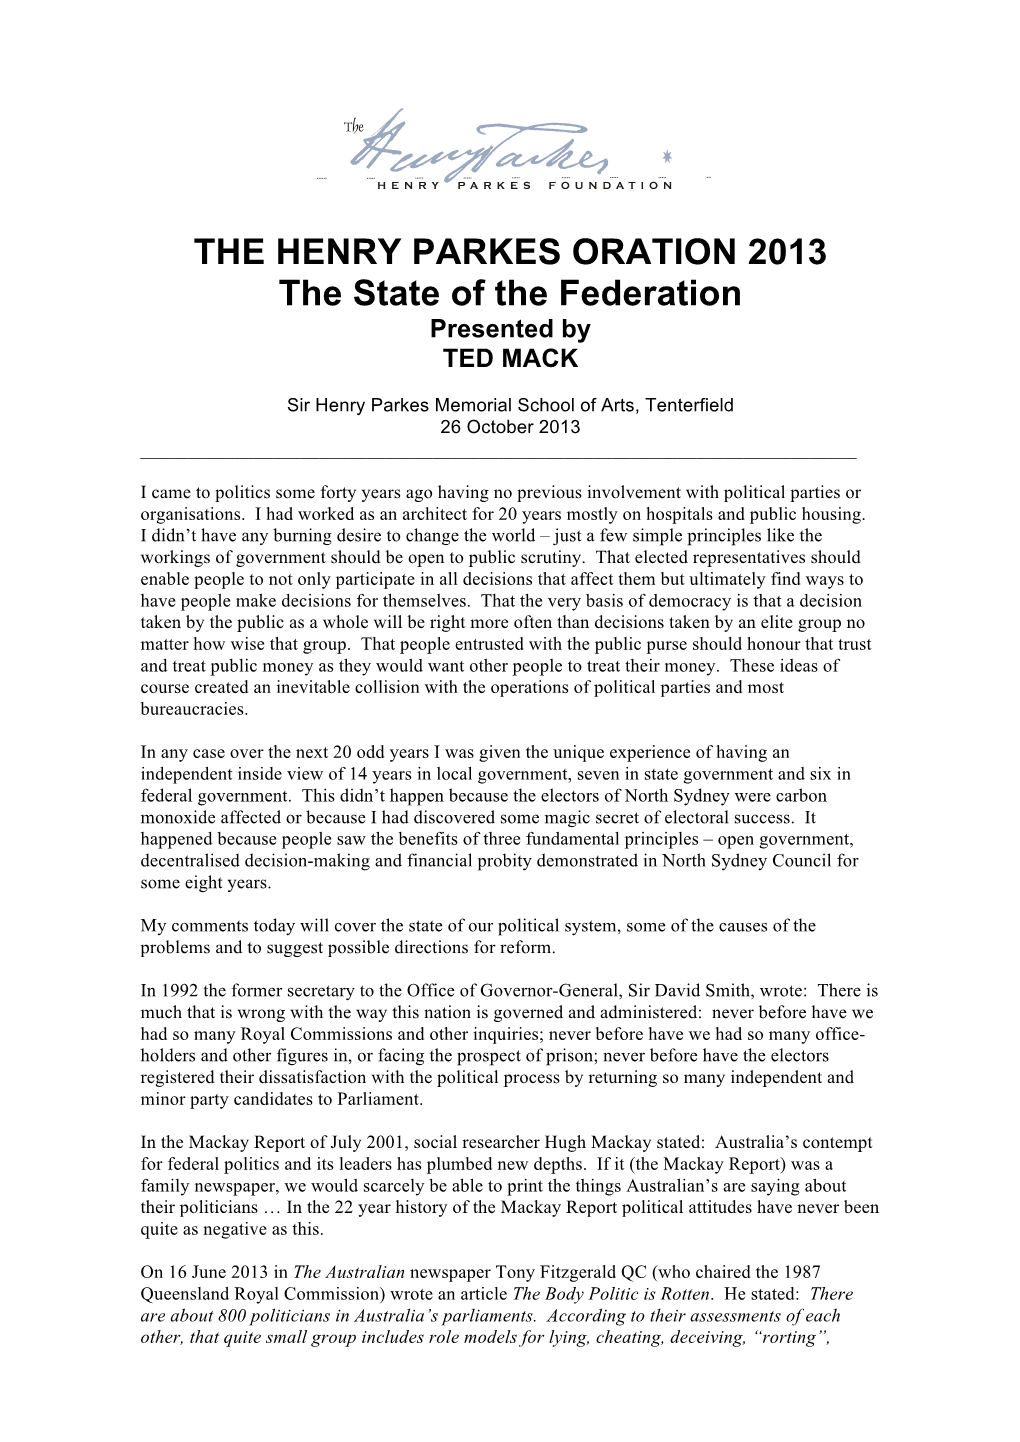 HENRY PARKES ORATION 2013 the State of the Federation Presented by TED MACK